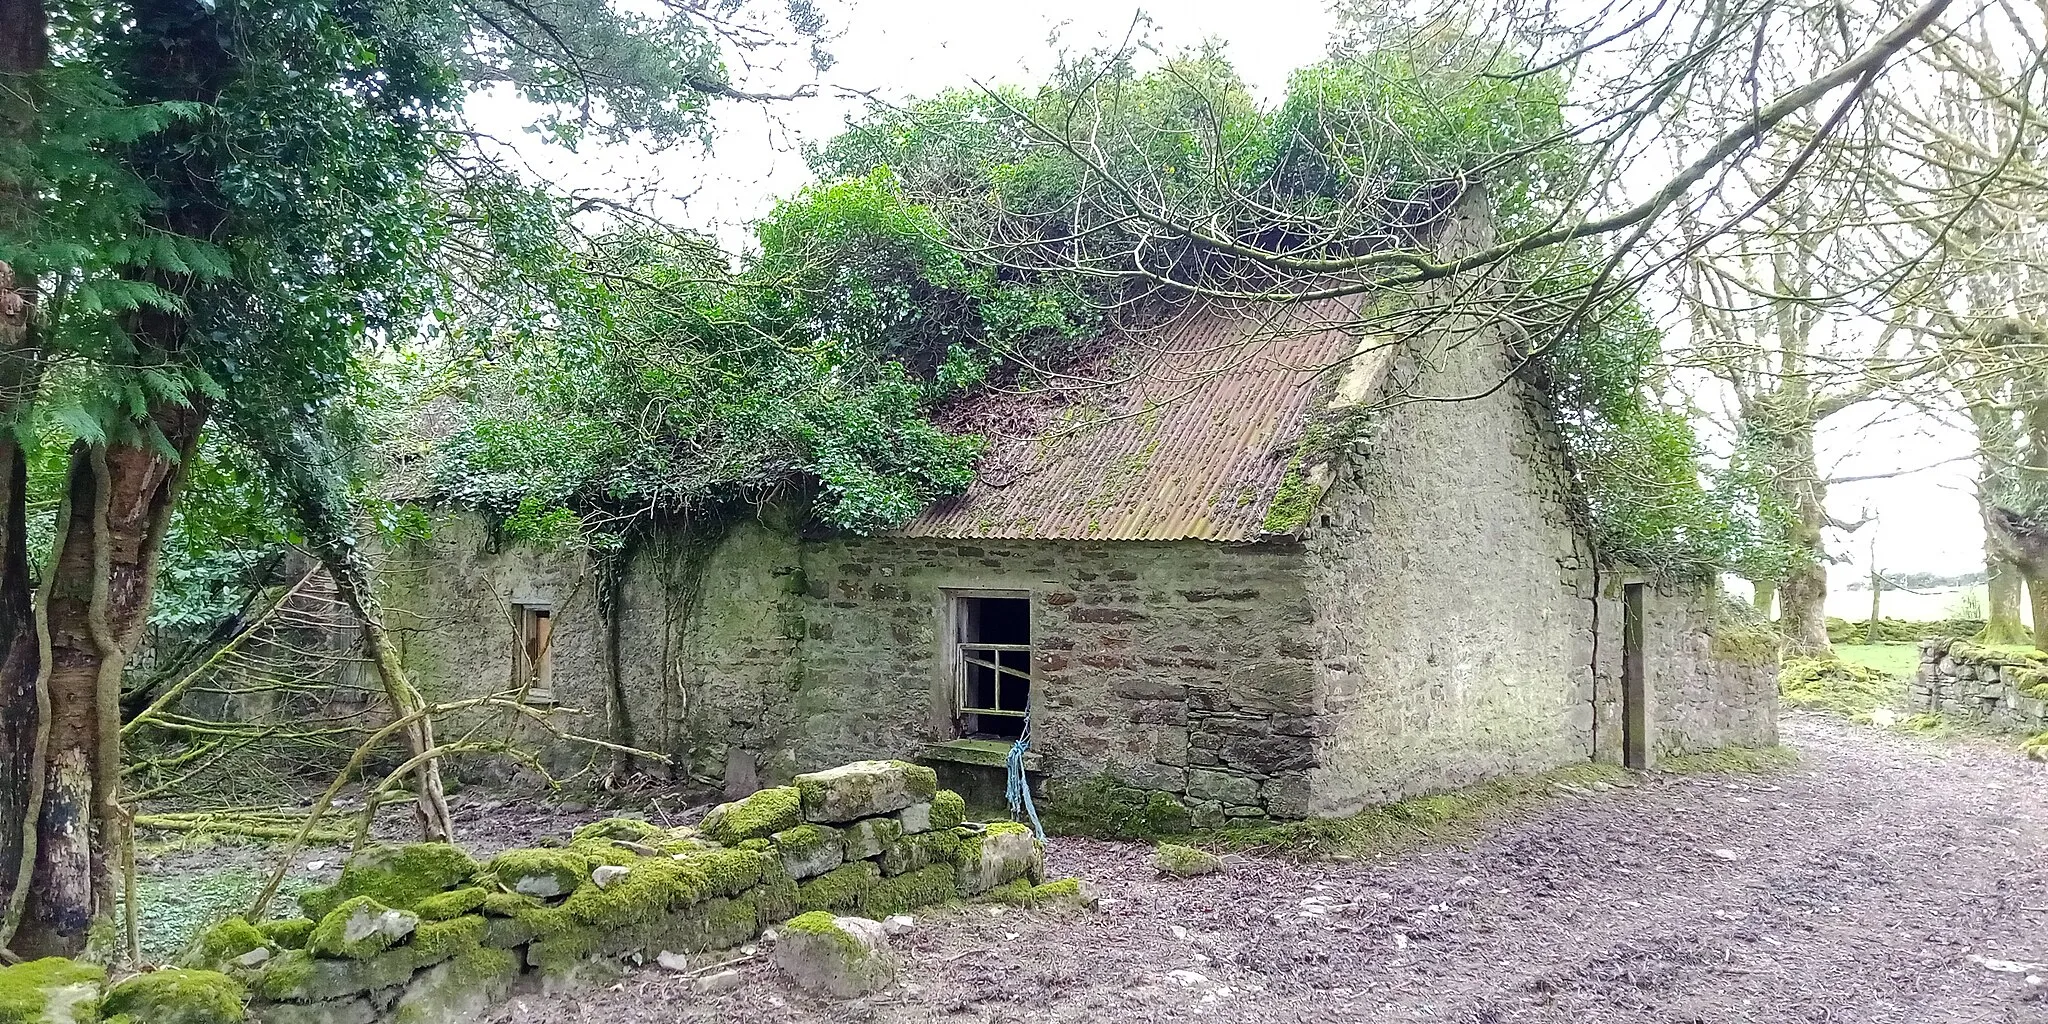 Photo showing: Abandoned and derelict Dwyer Homestead in the townland of Bregaun near the Summit Loop in Co. Kilkenny